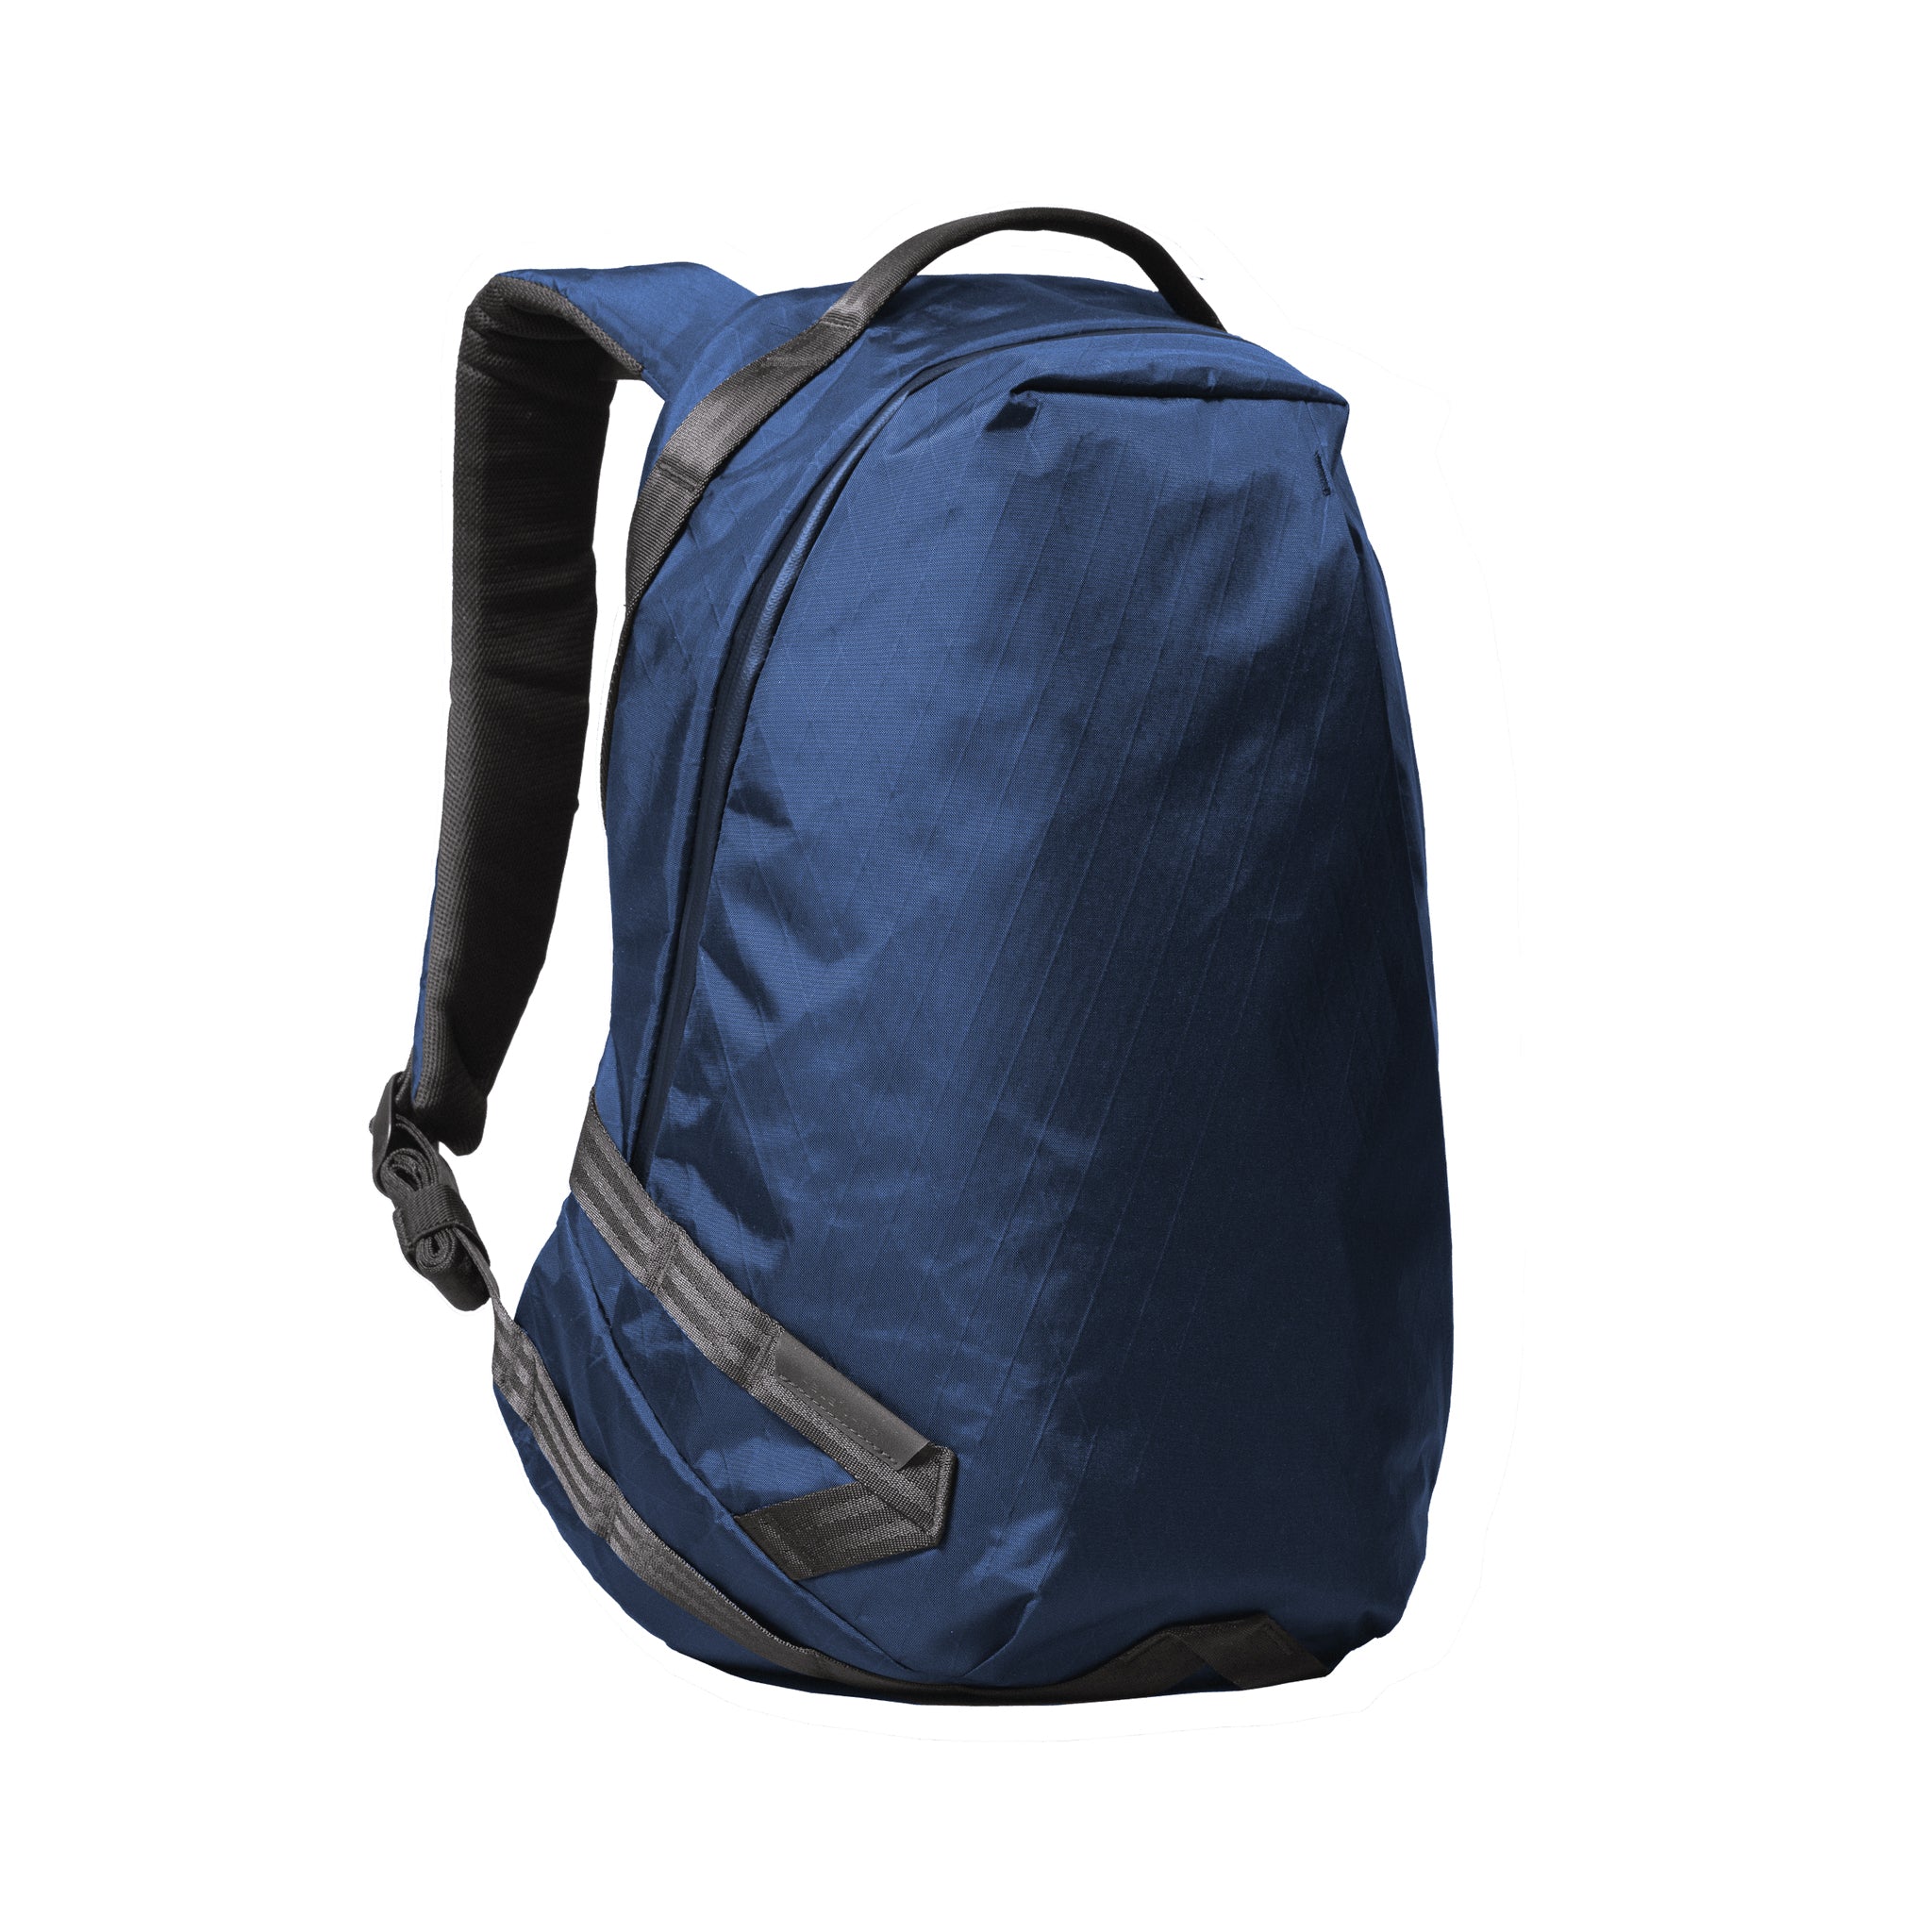 Able Carry Daily Backpack X-Pac Black - www.macaluminio.com